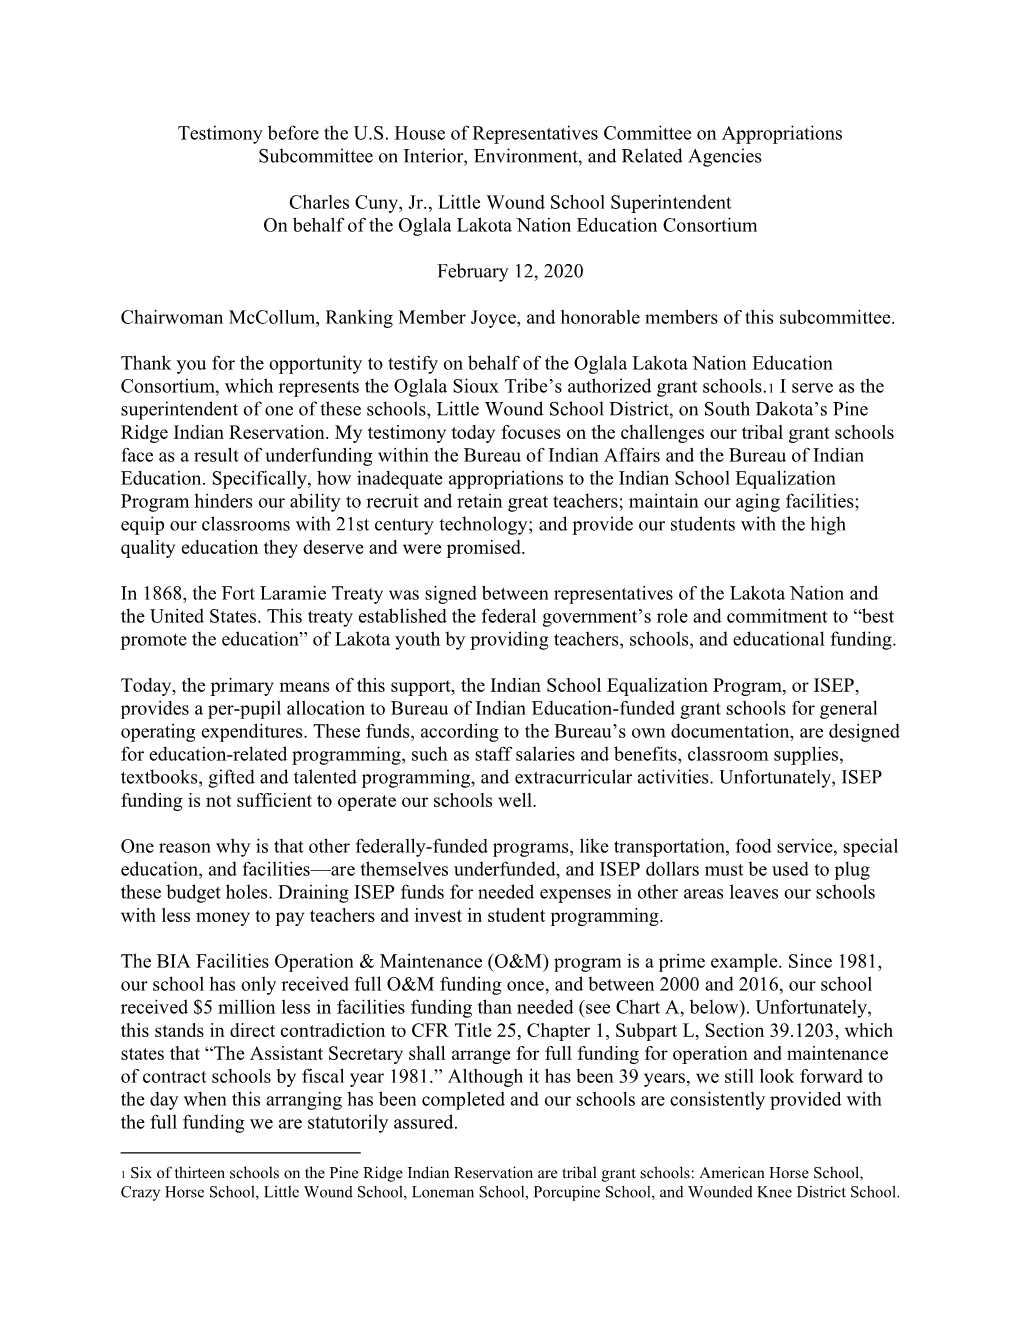 Testimony Before the U.S. House of Representatives Committee on Appropriations Subcommittee on Interior, Environment, and Related Agencies